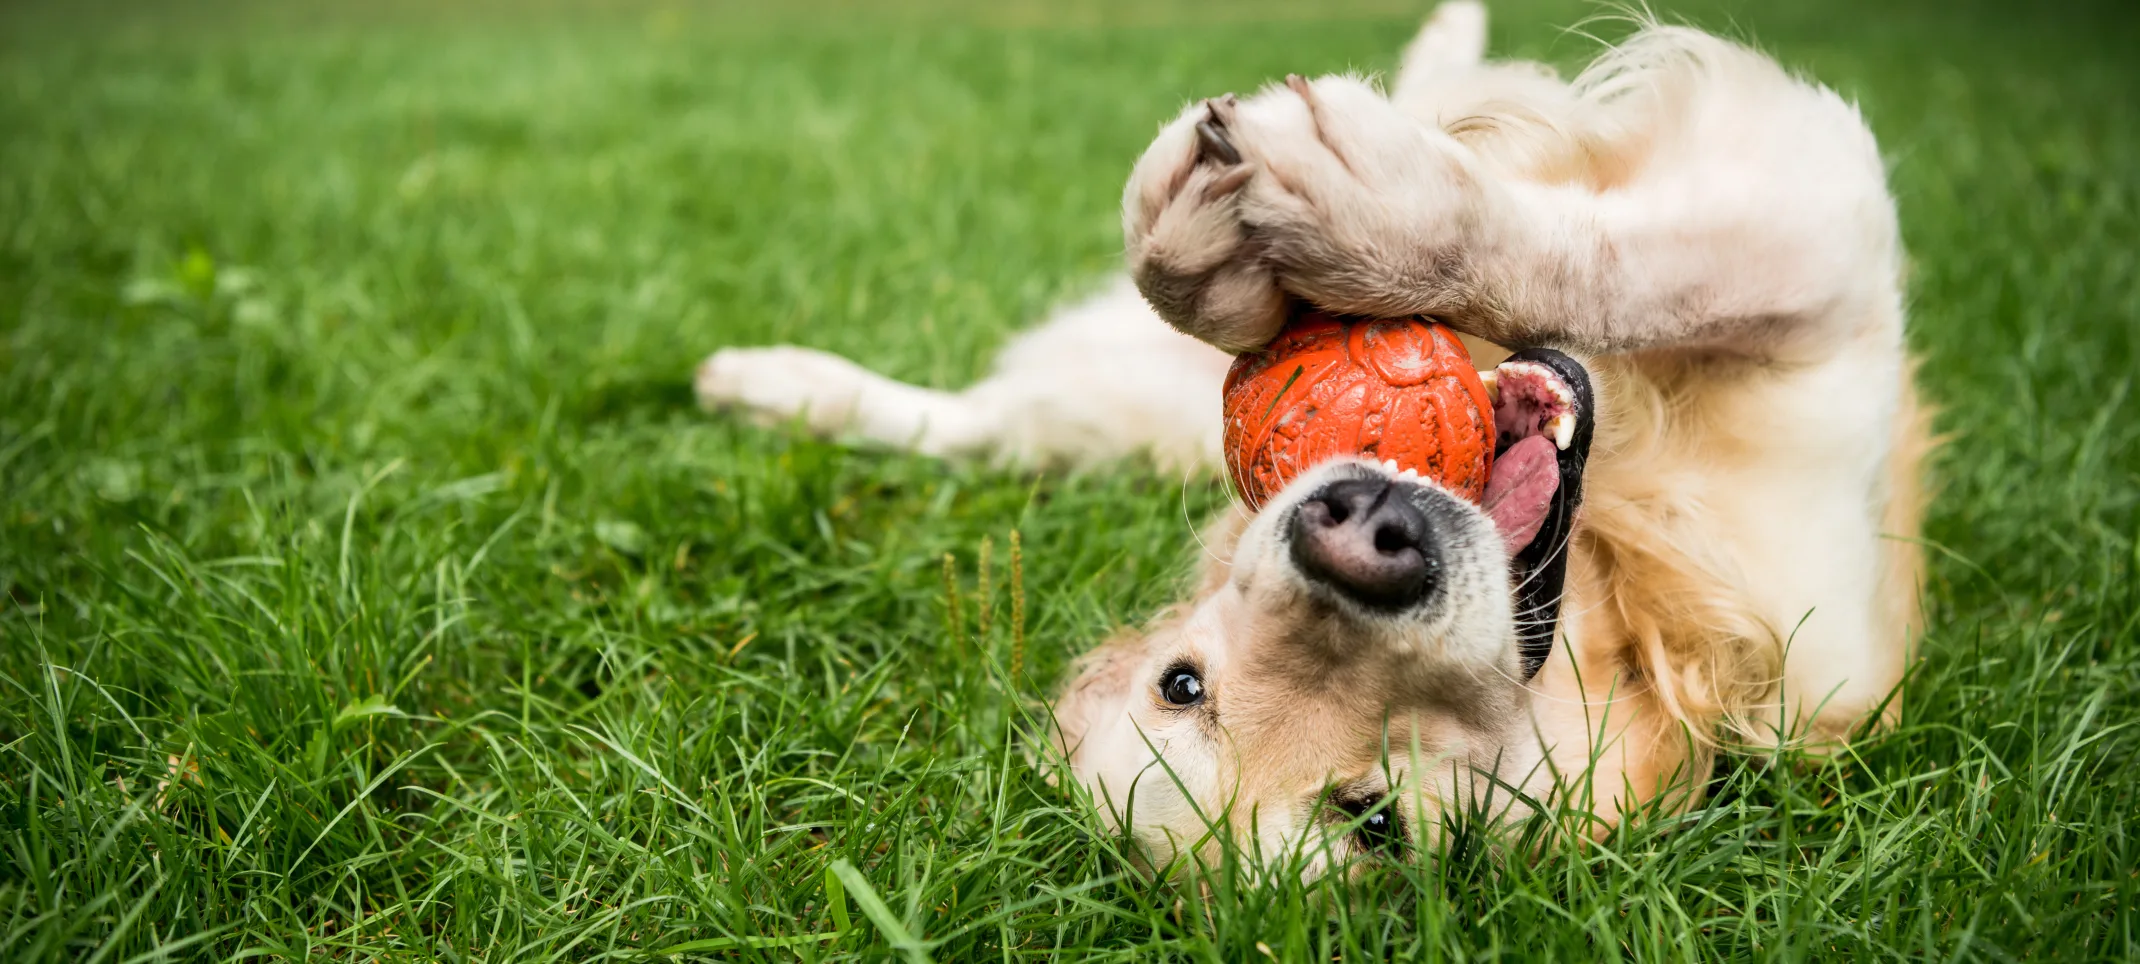 Dog laying in the grass playing with a red ball